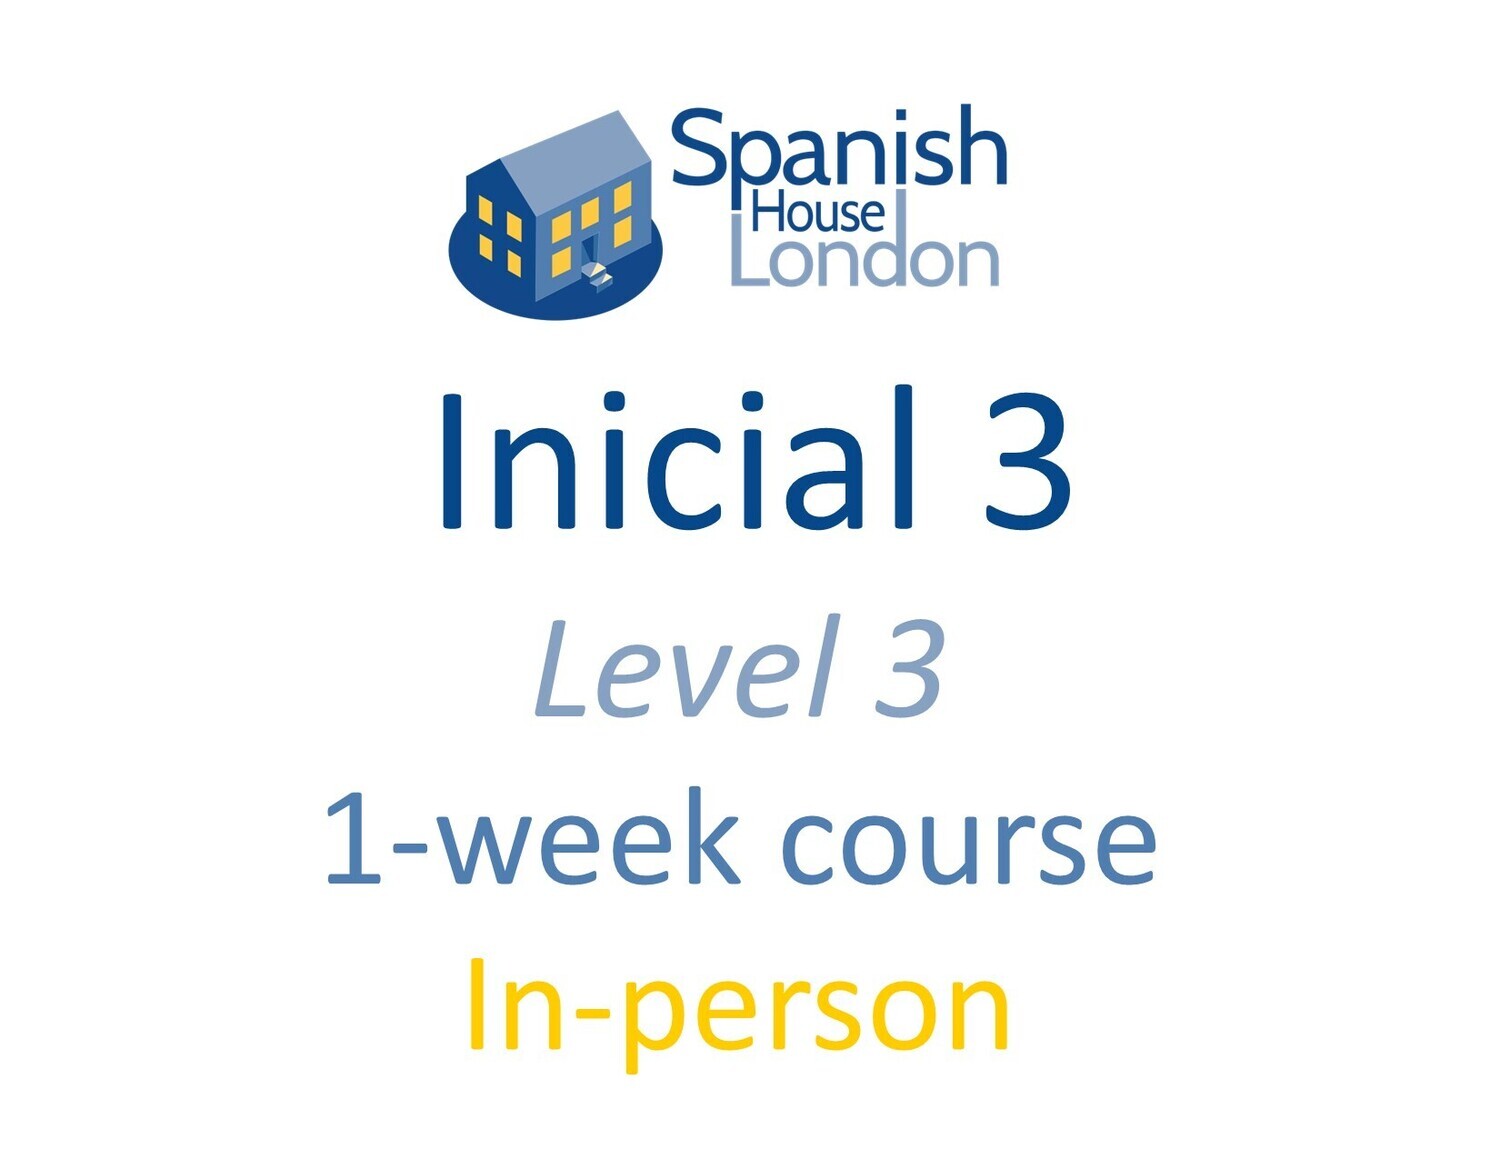 One-Week Intensive Inicial 3 Course starting on 19th  June at 10.30am in Clapham North